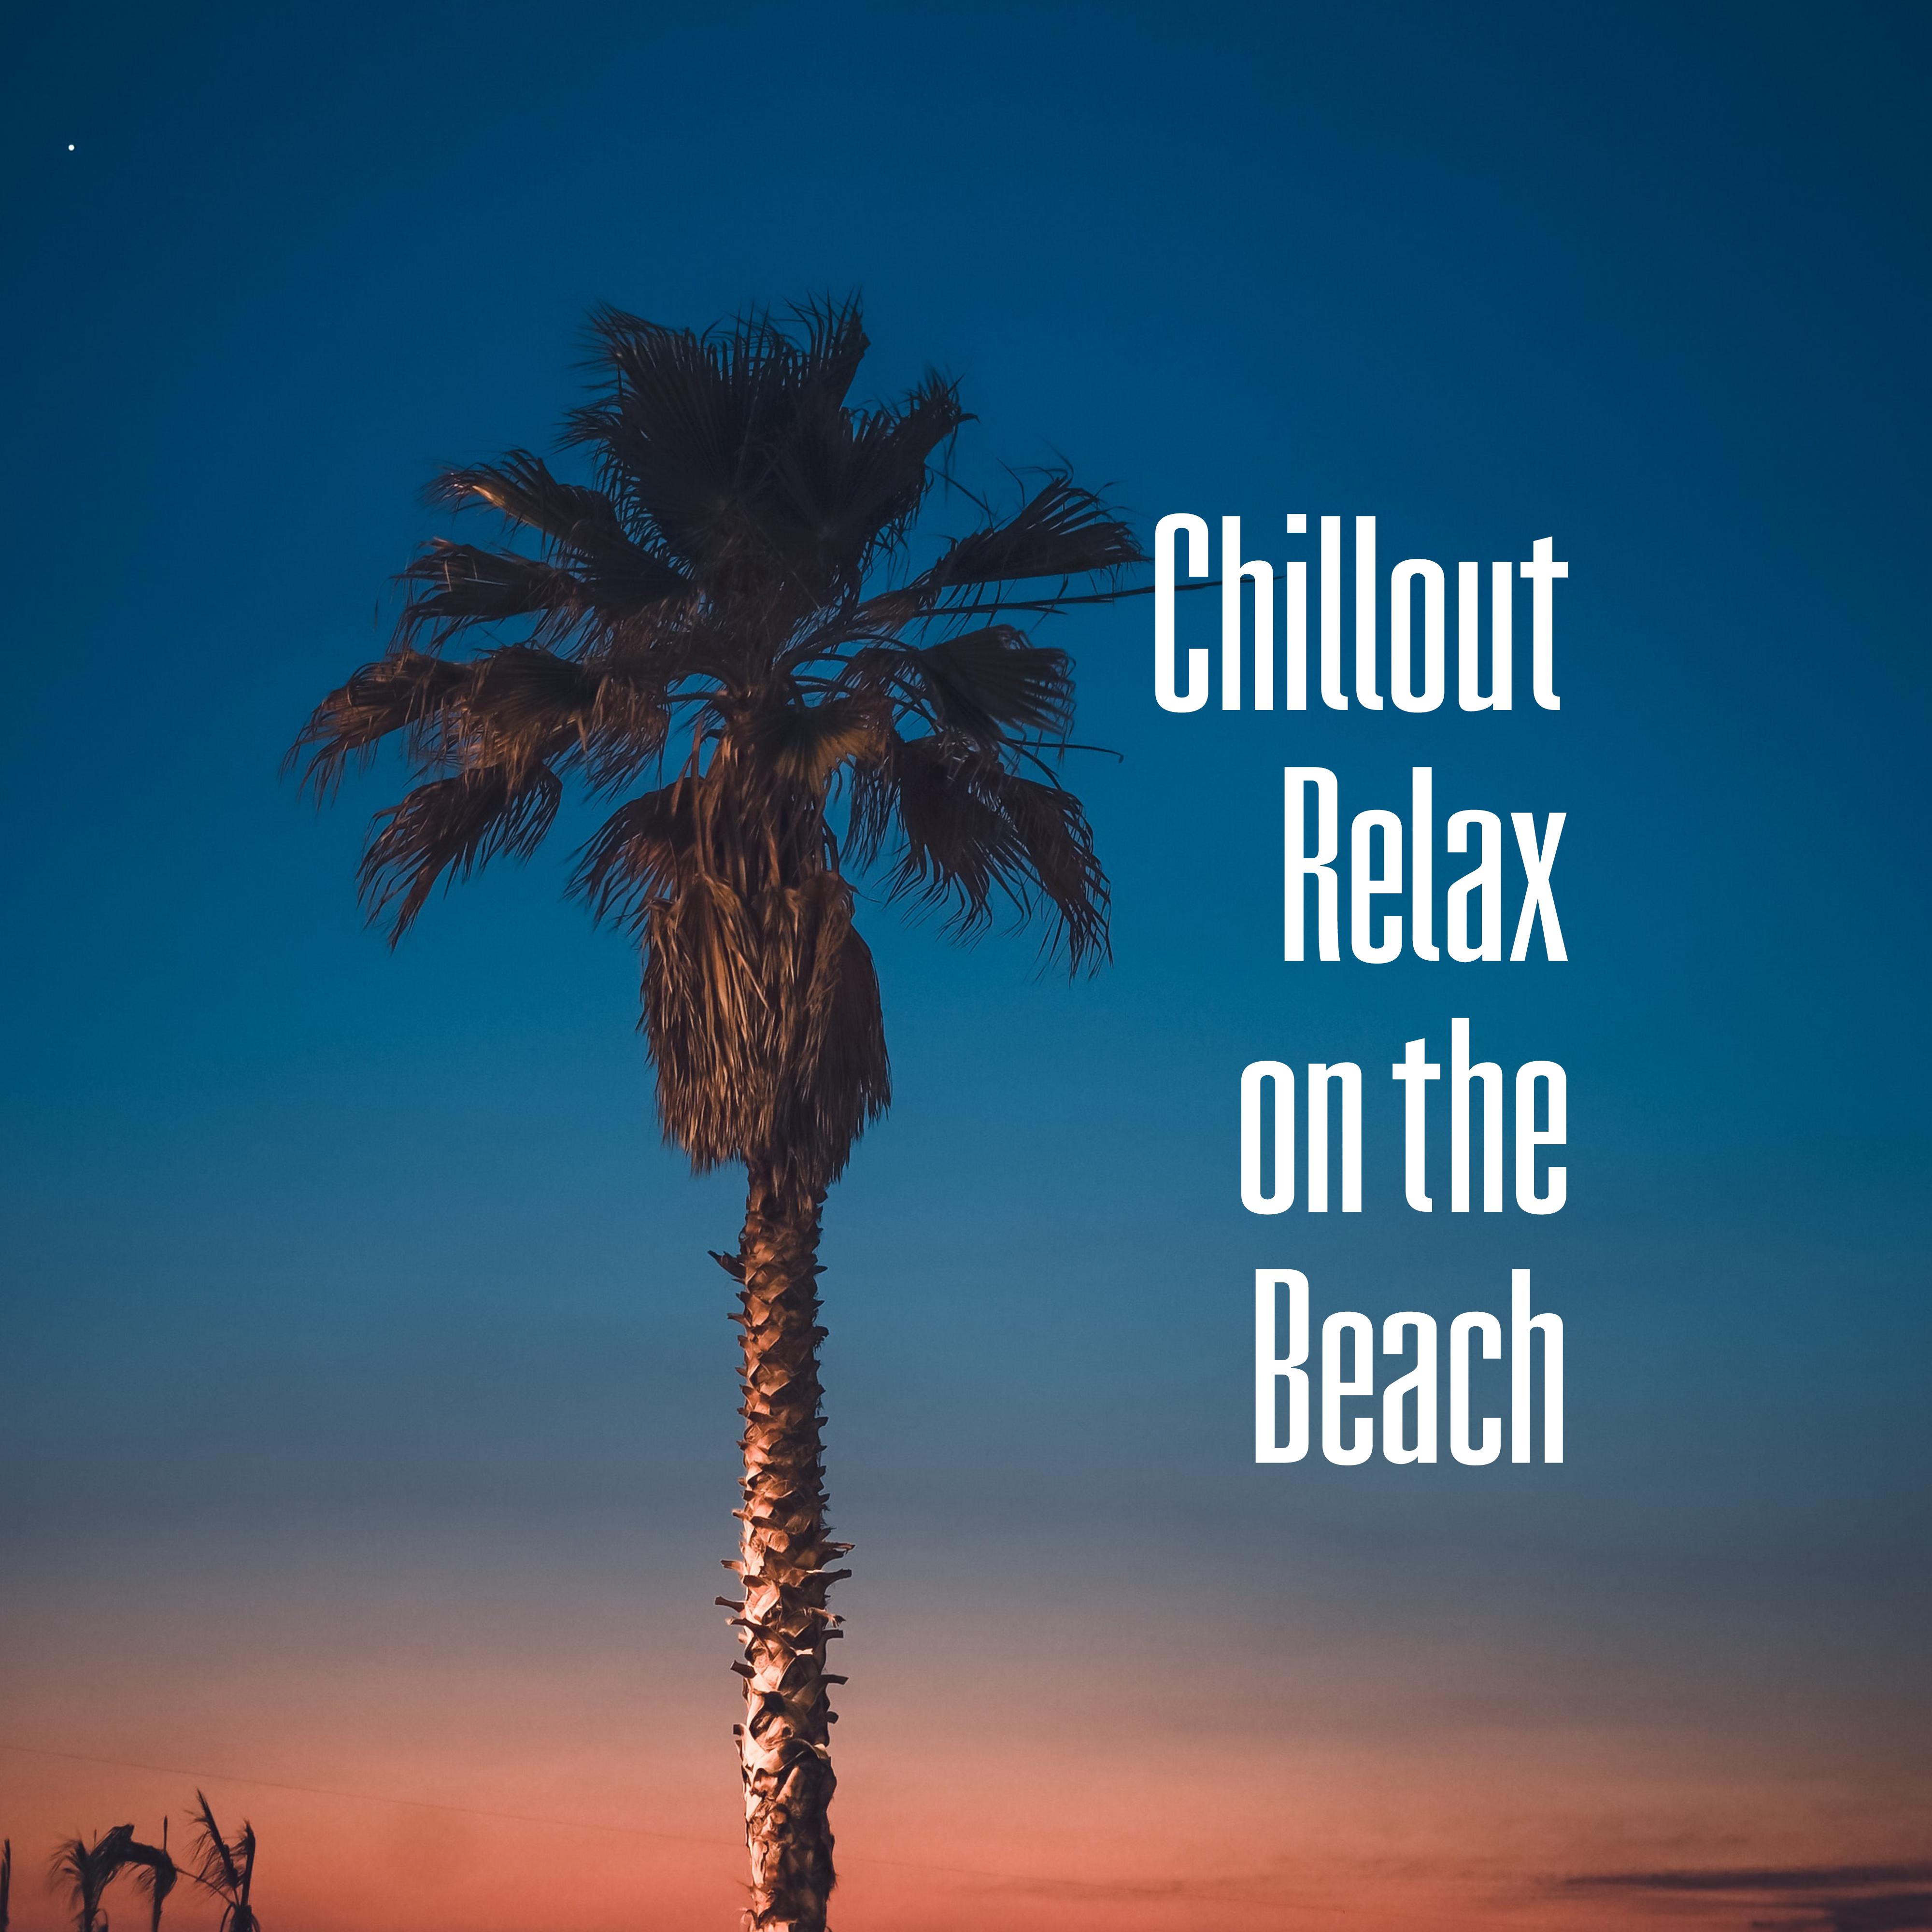 Chillout Relax on the Beach: Music Compilation